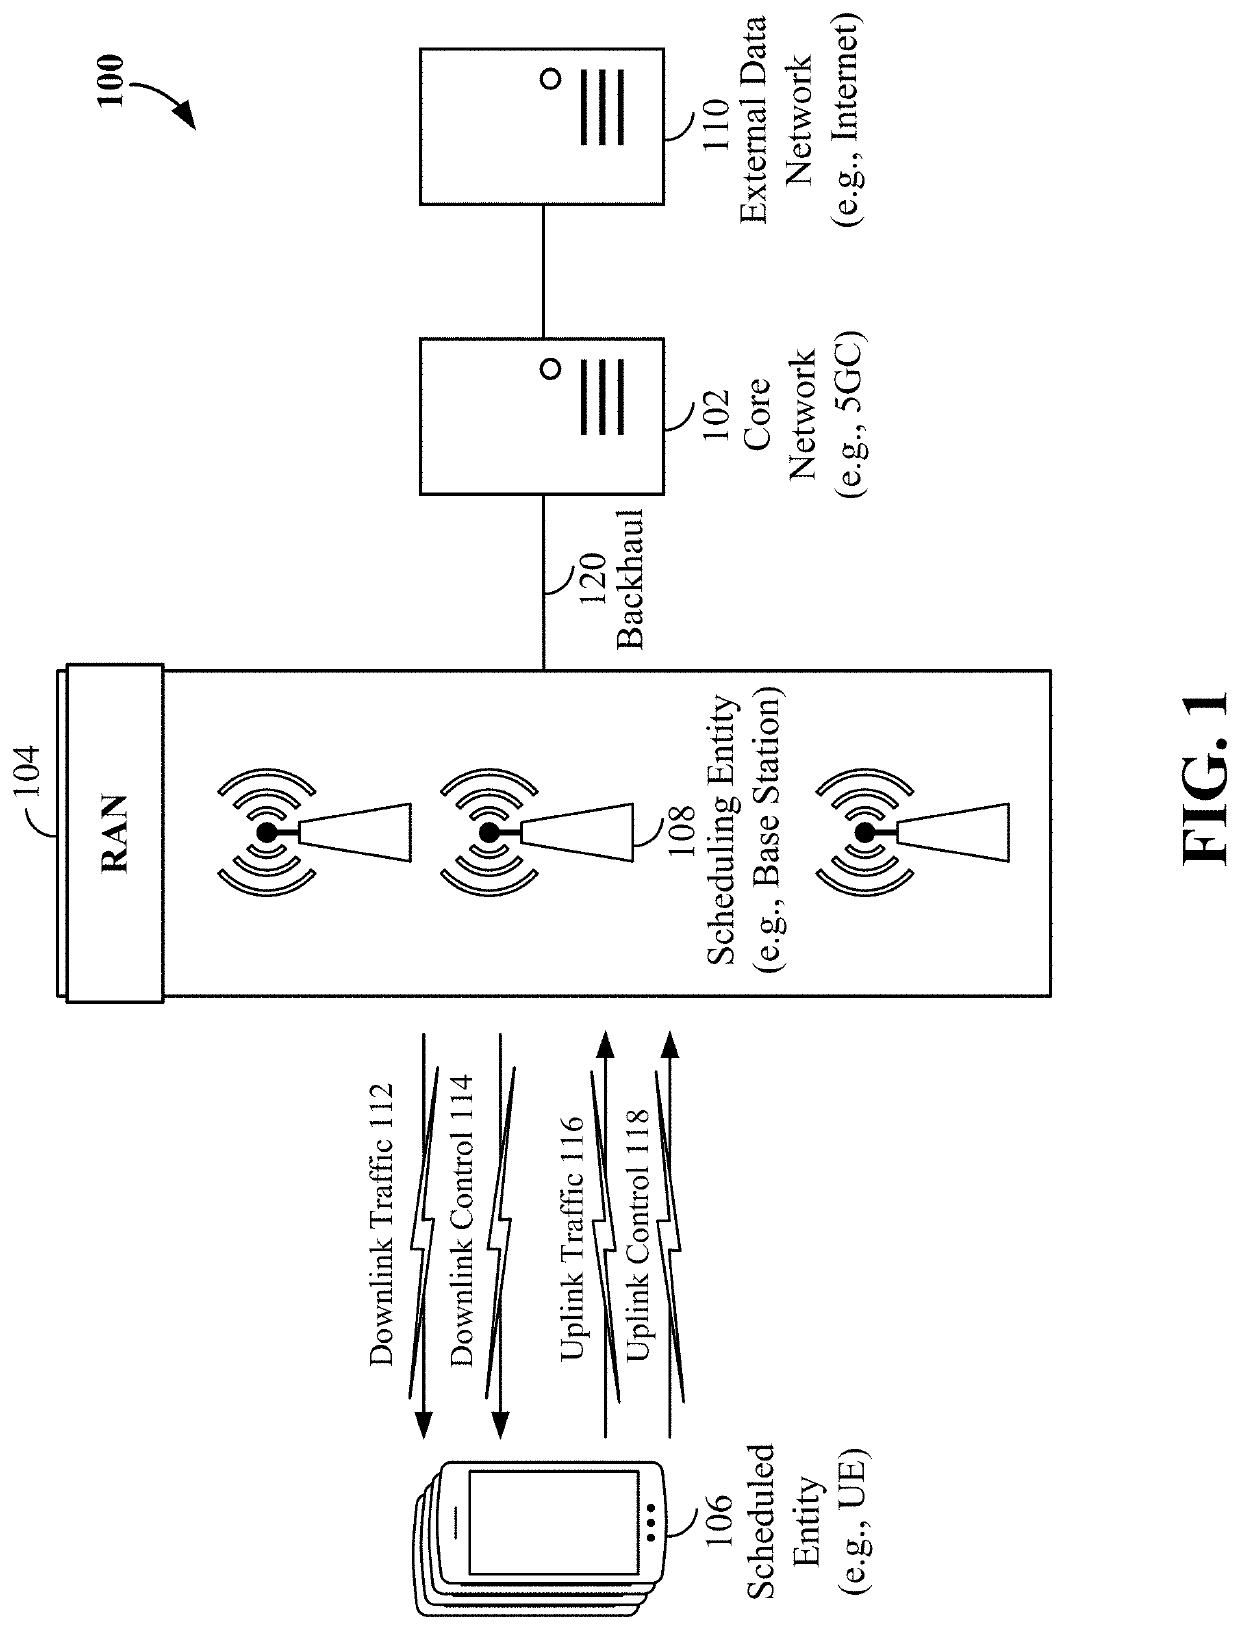 Hybrid automatic repeat request processes for sub-band full duplex